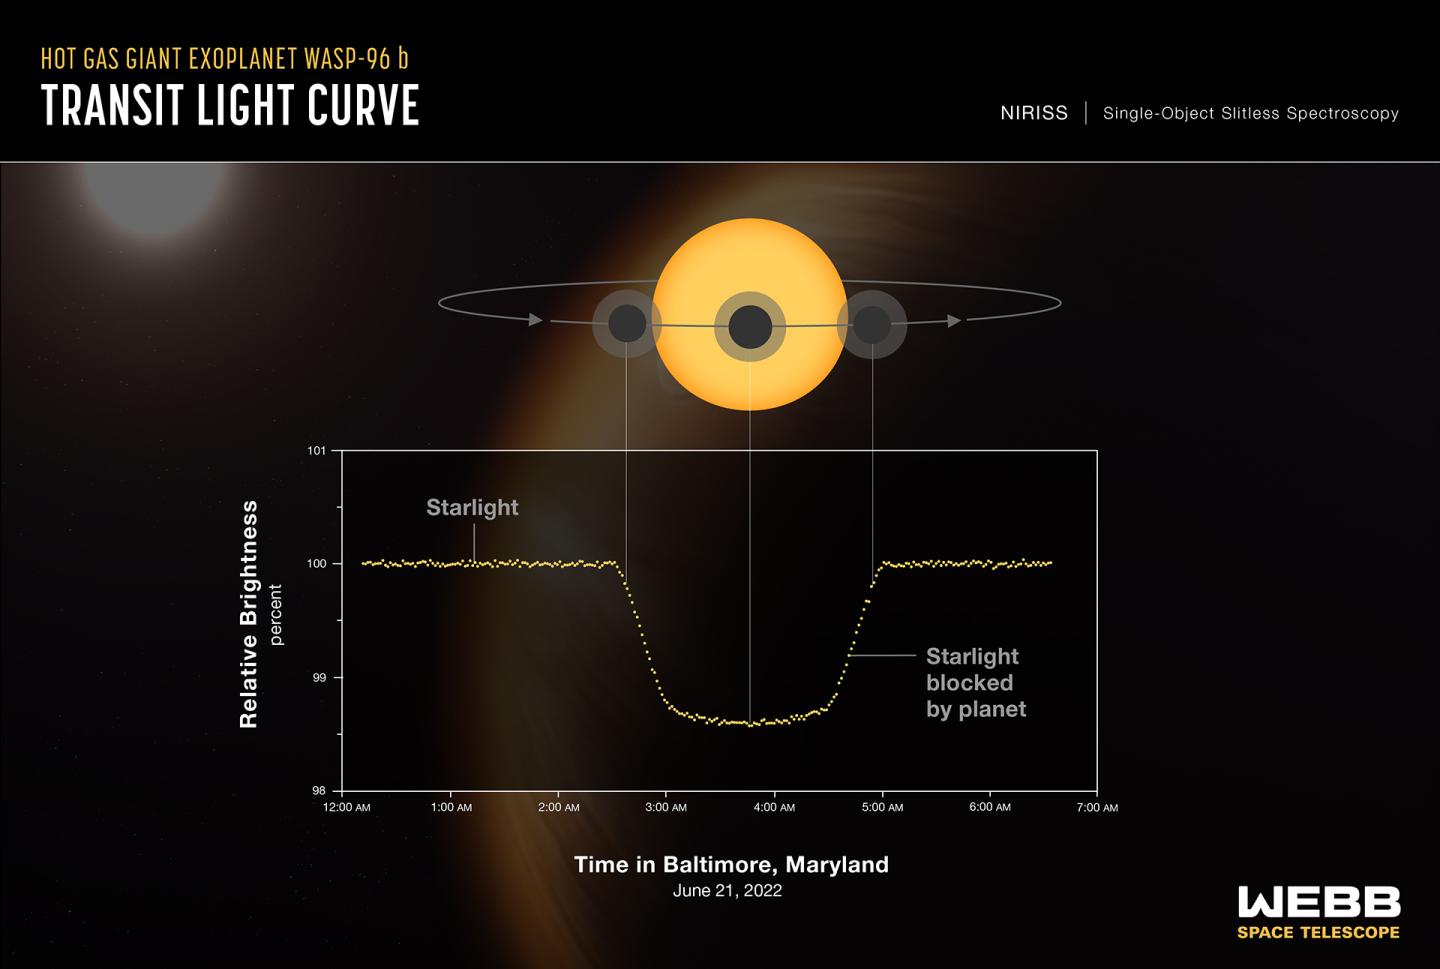 Infographic titled “Hot Gas Giant Exoplanet WASP-96 b Transit Light Curve, NIRISS Single-Object Slitless Spectroscopy.” At the top of the infographic is a diagram showing a planet transiting (moving in front of) its star. Below the diagram is a graph showing the change in relative brightness of the star-planet system